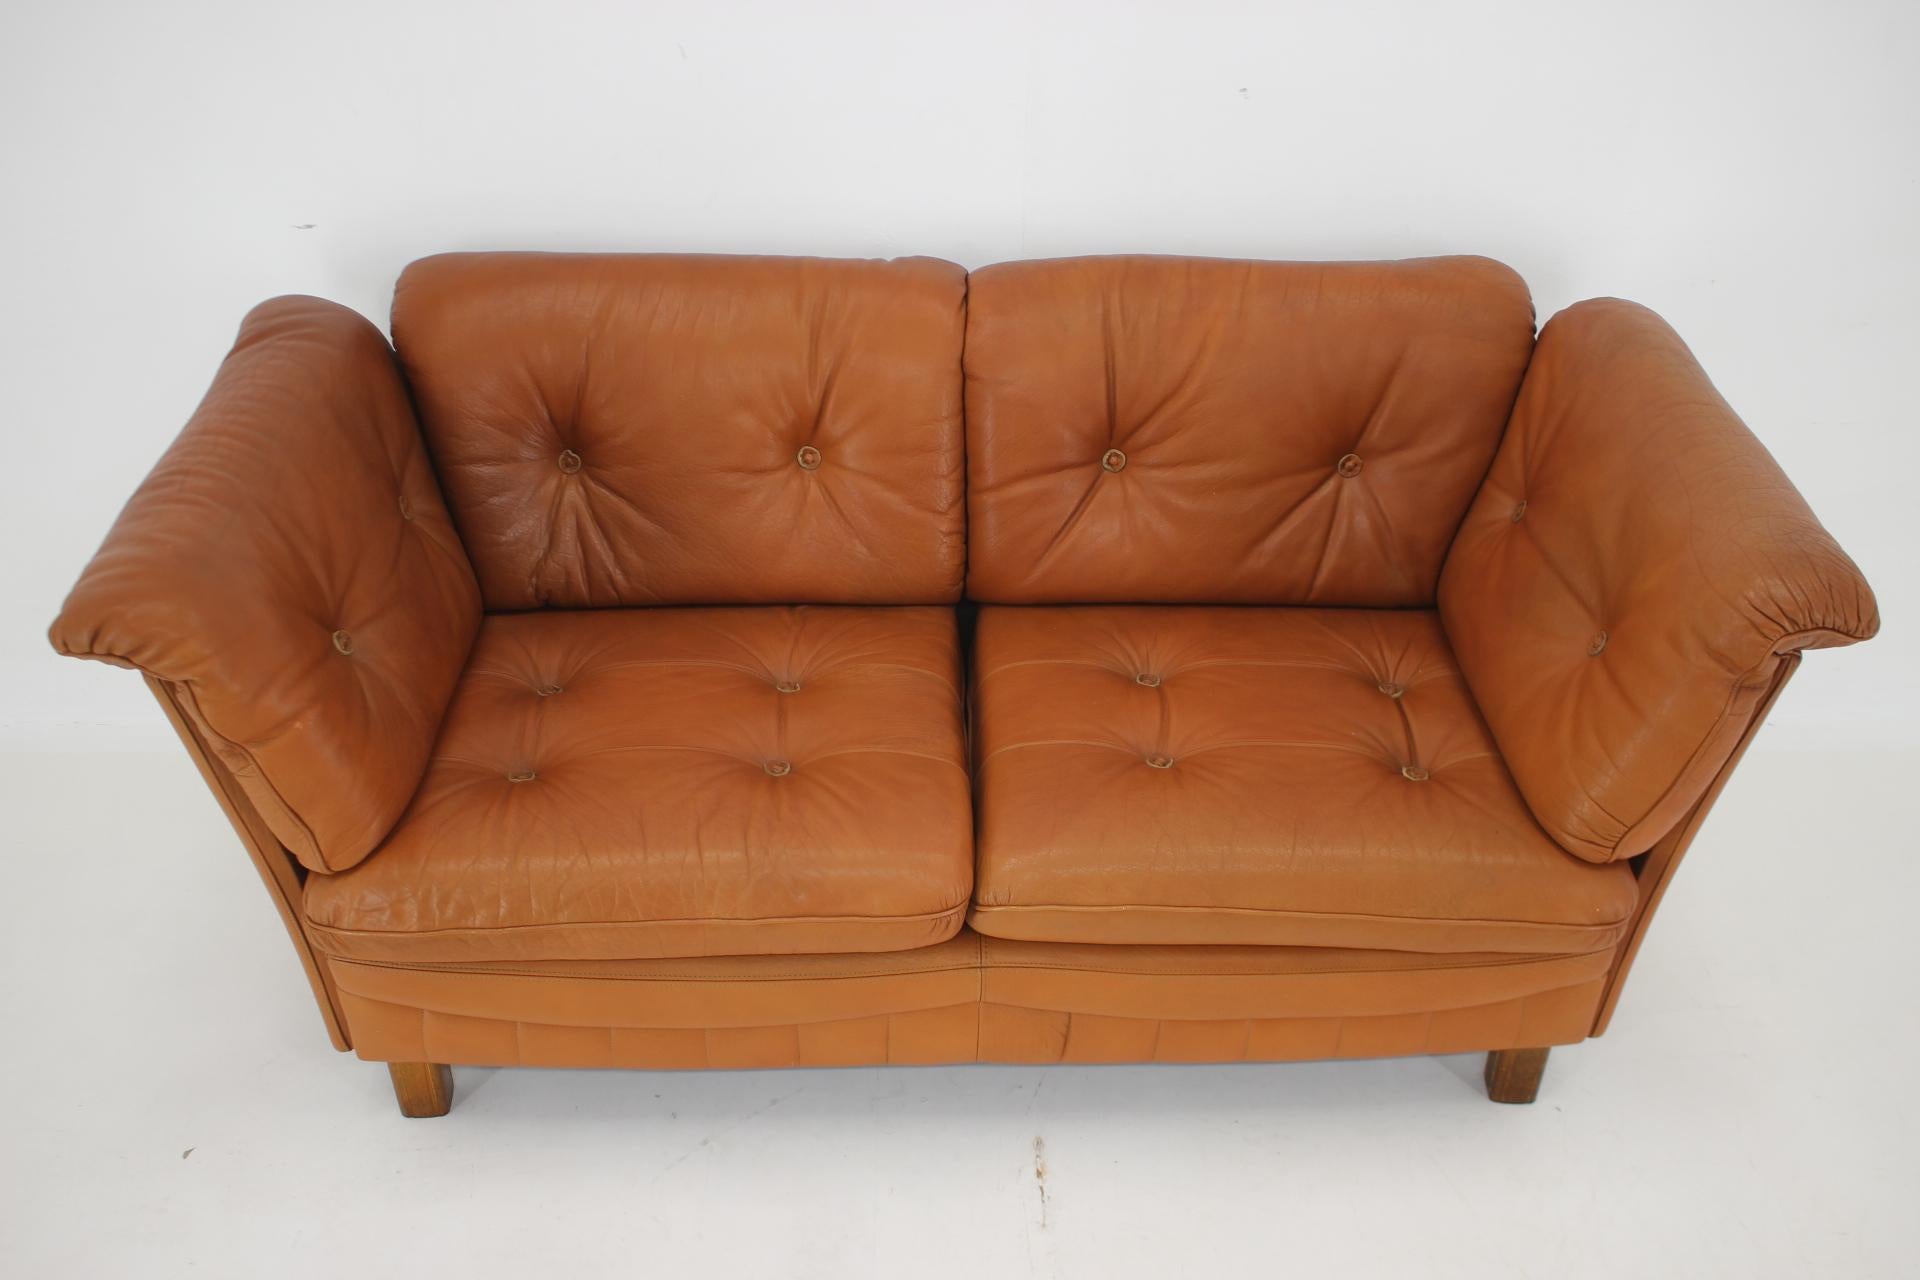 1970s Danish Cognac Leather 2 Seater Sofa In Good Condition For Sale In Praha, CZ